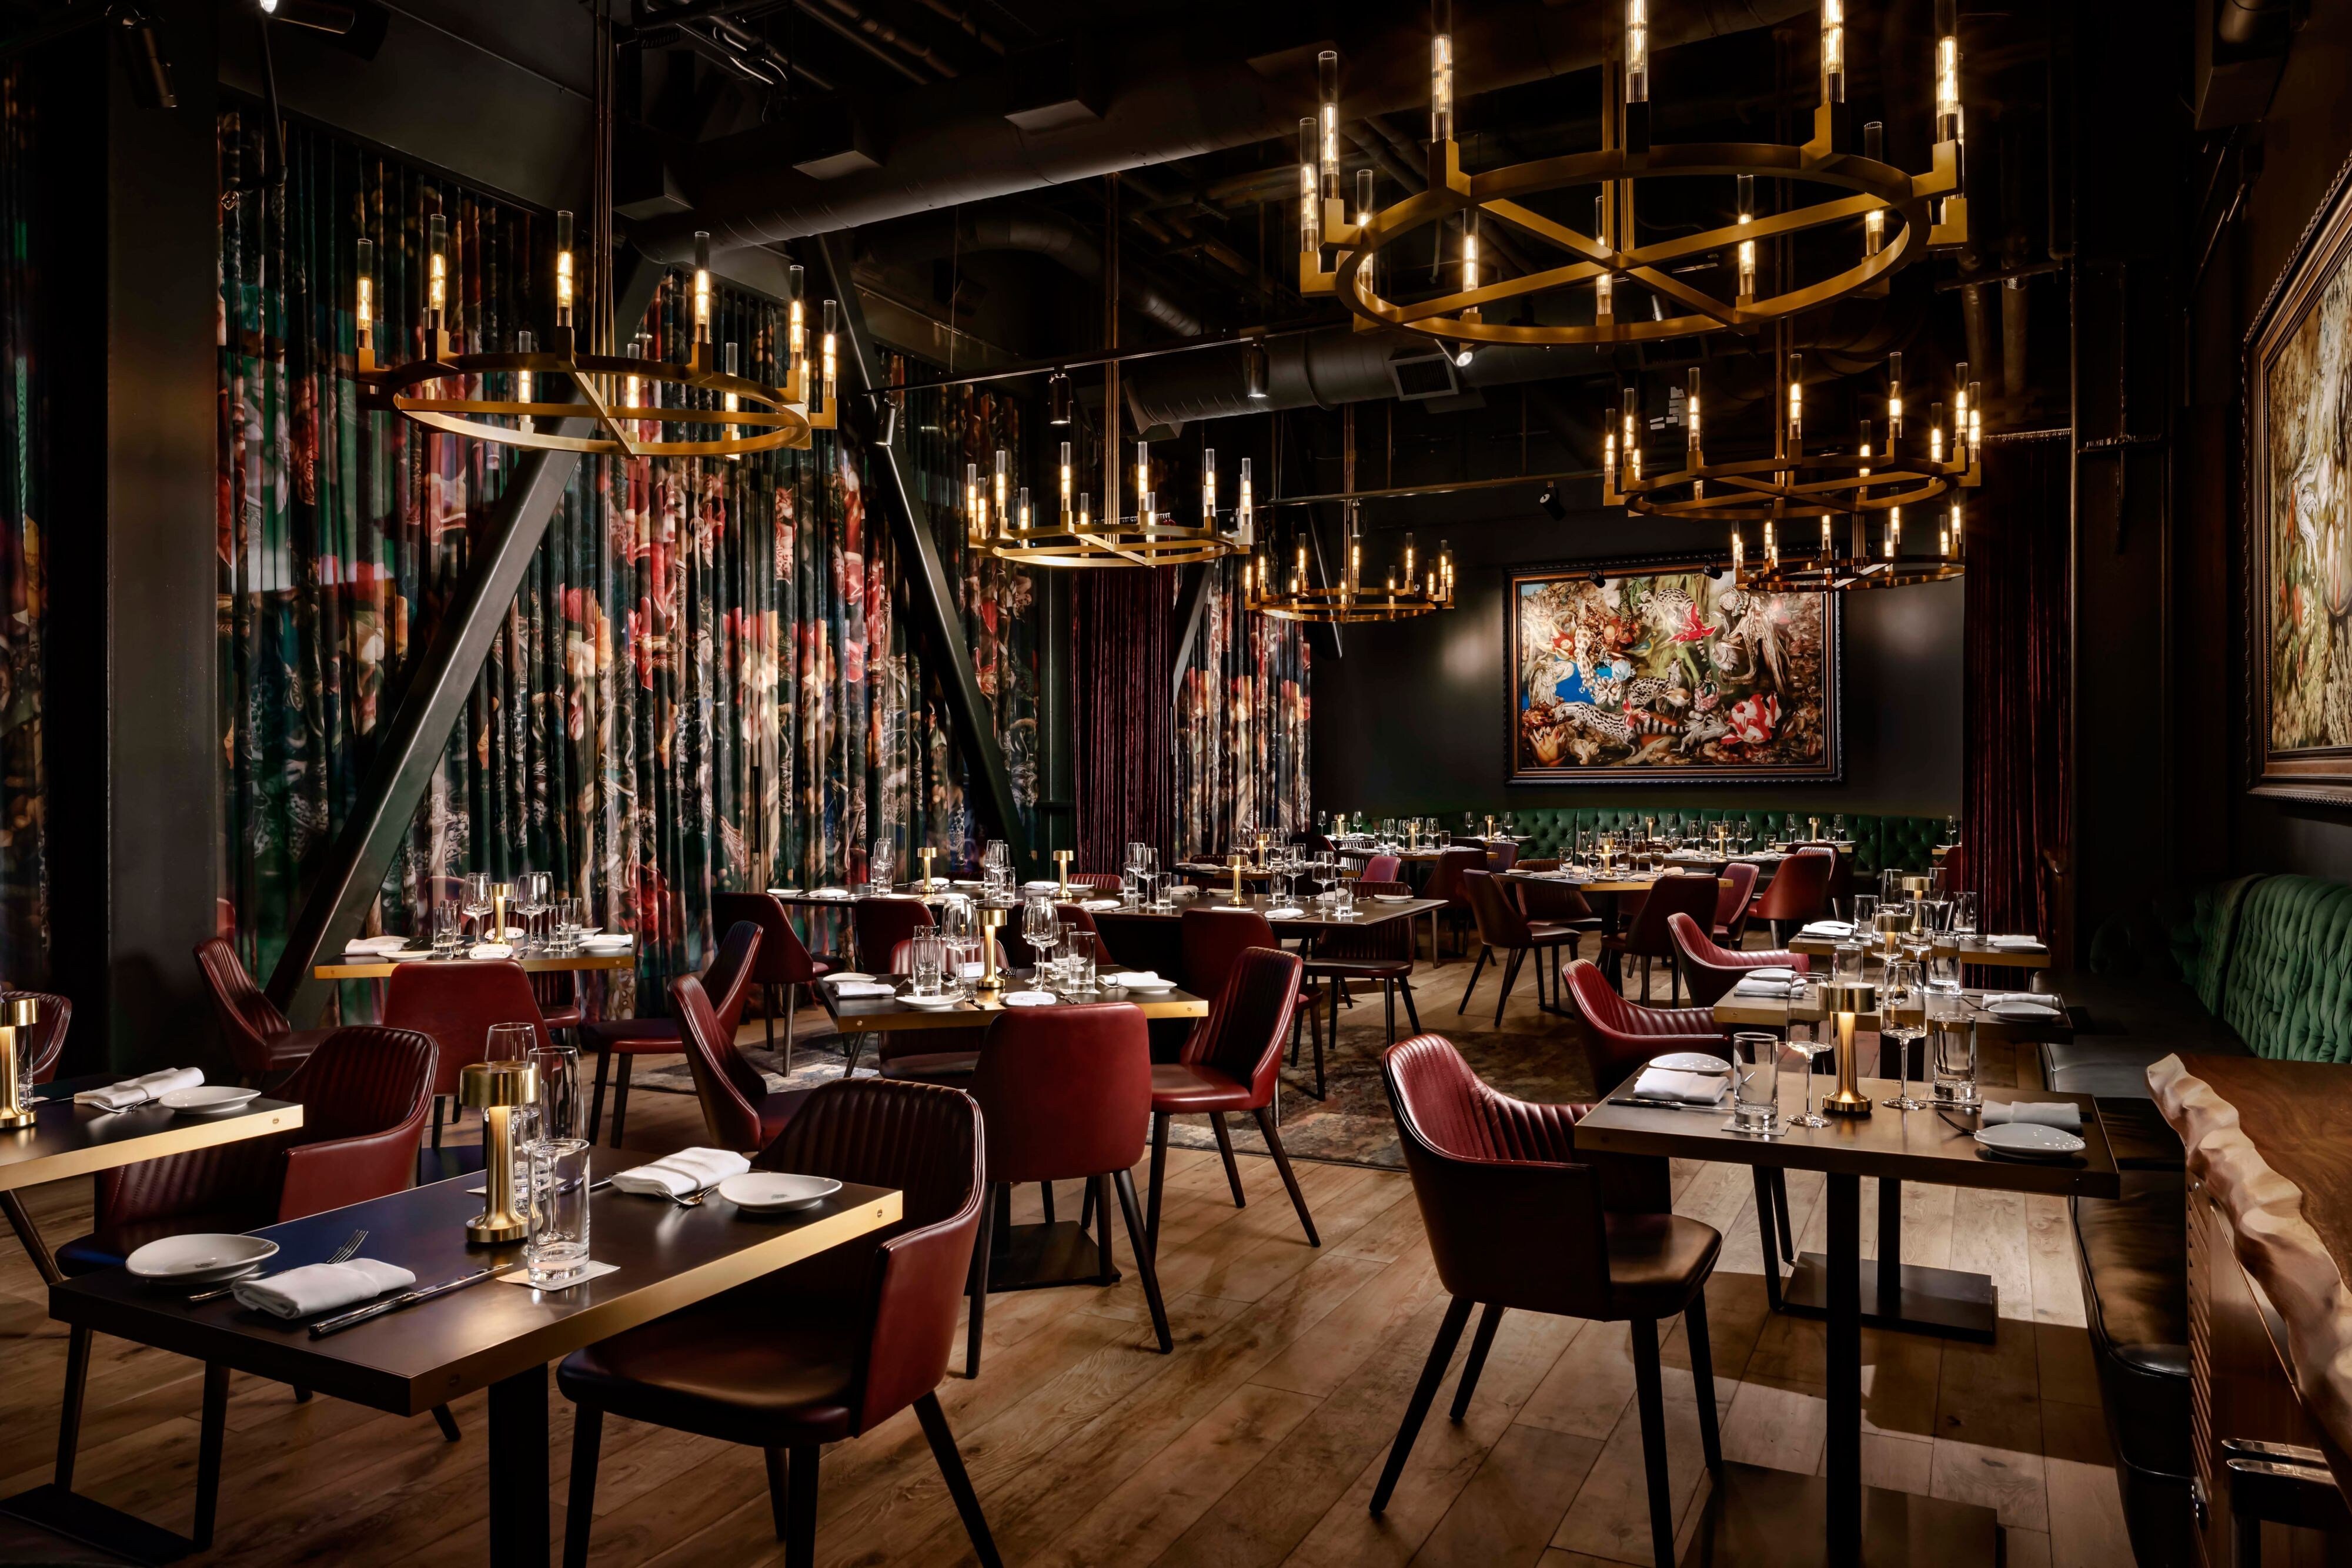 Stone & Webster Chophouse Private Dining